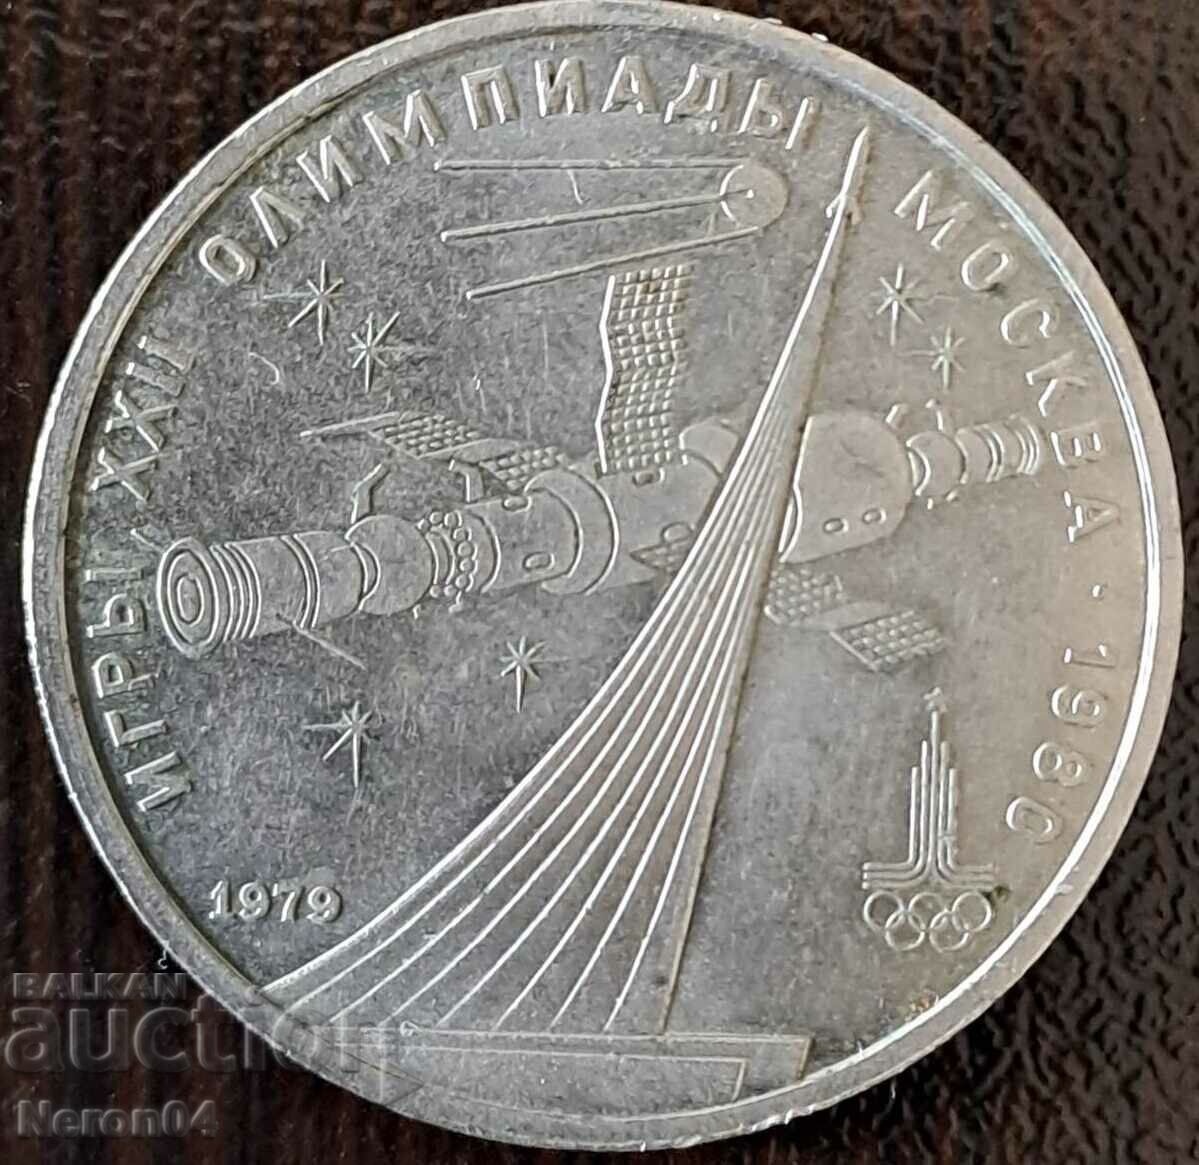 1 ruble 1979 (satellite and union), USSR